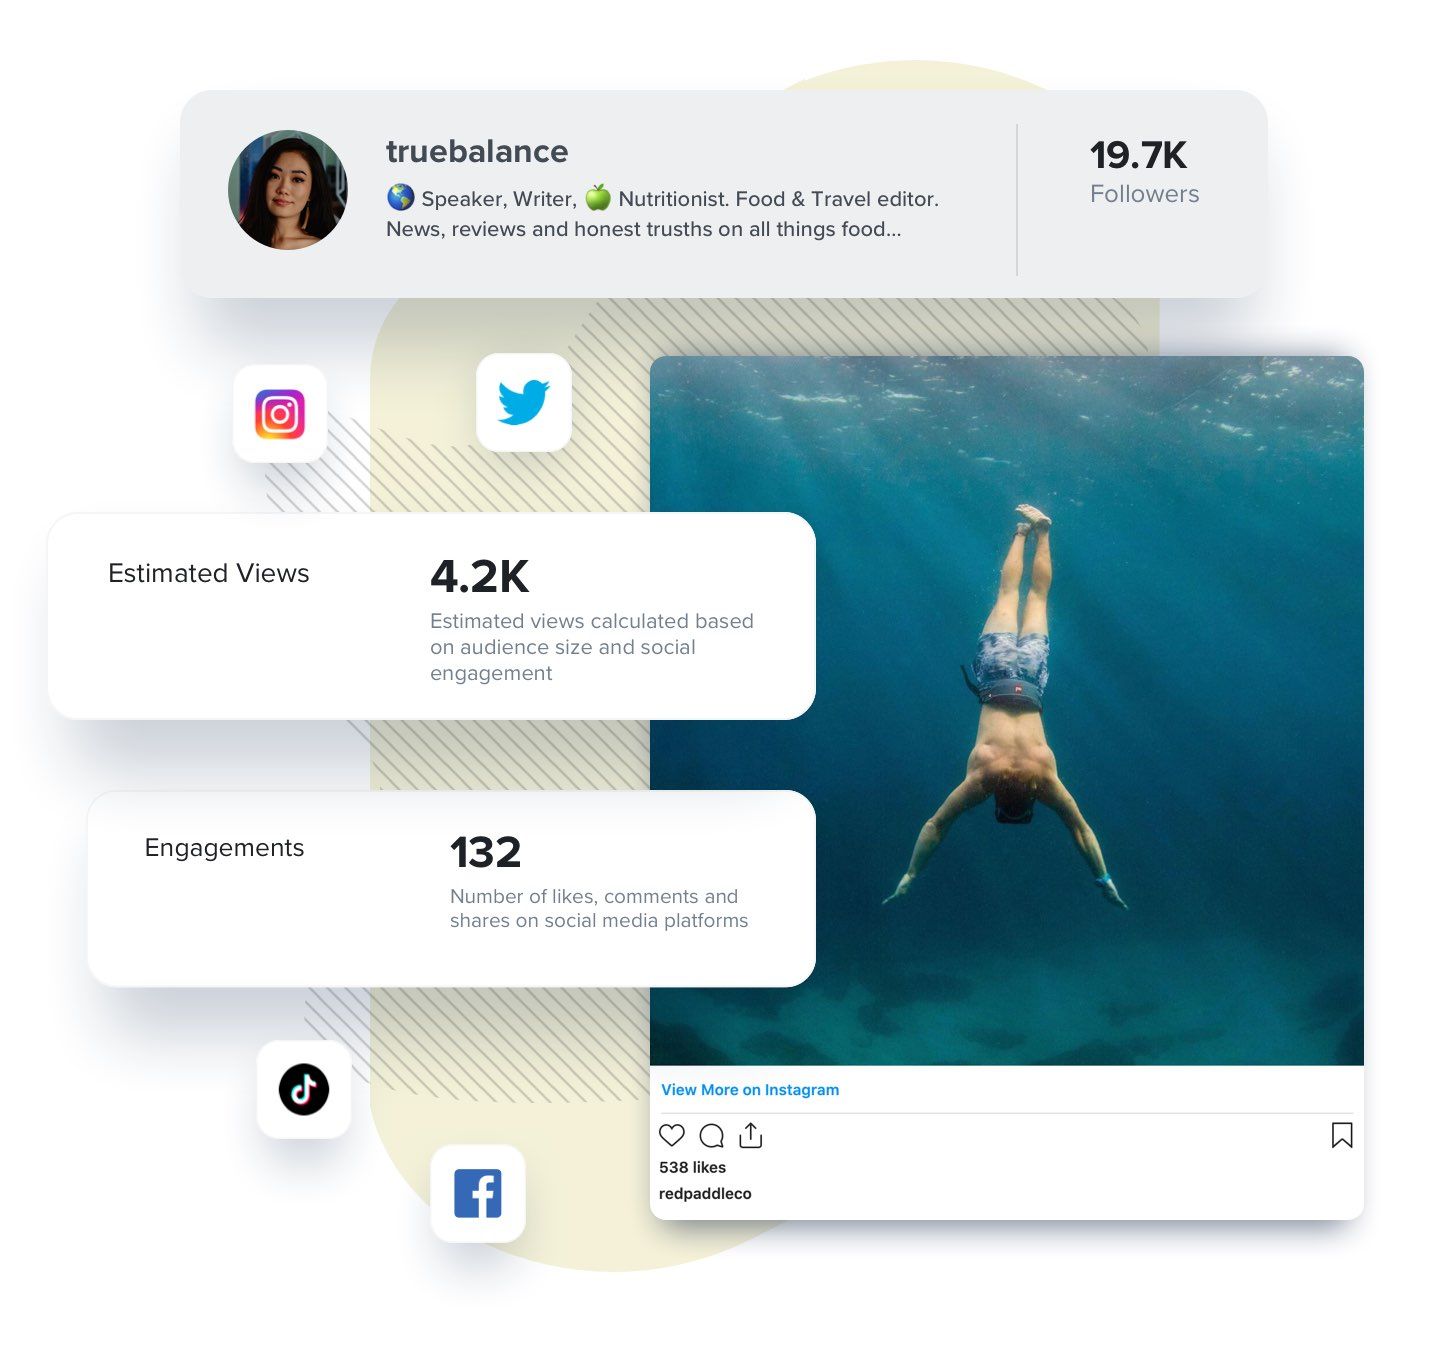 Paste in your links from Instagram, Twitter, Facebook & Tik Tok posts and automatically get metrics like followers, engagements and estimated views. On top of all that we’ll even pull back their profile image and a handy little bio for some extra contex